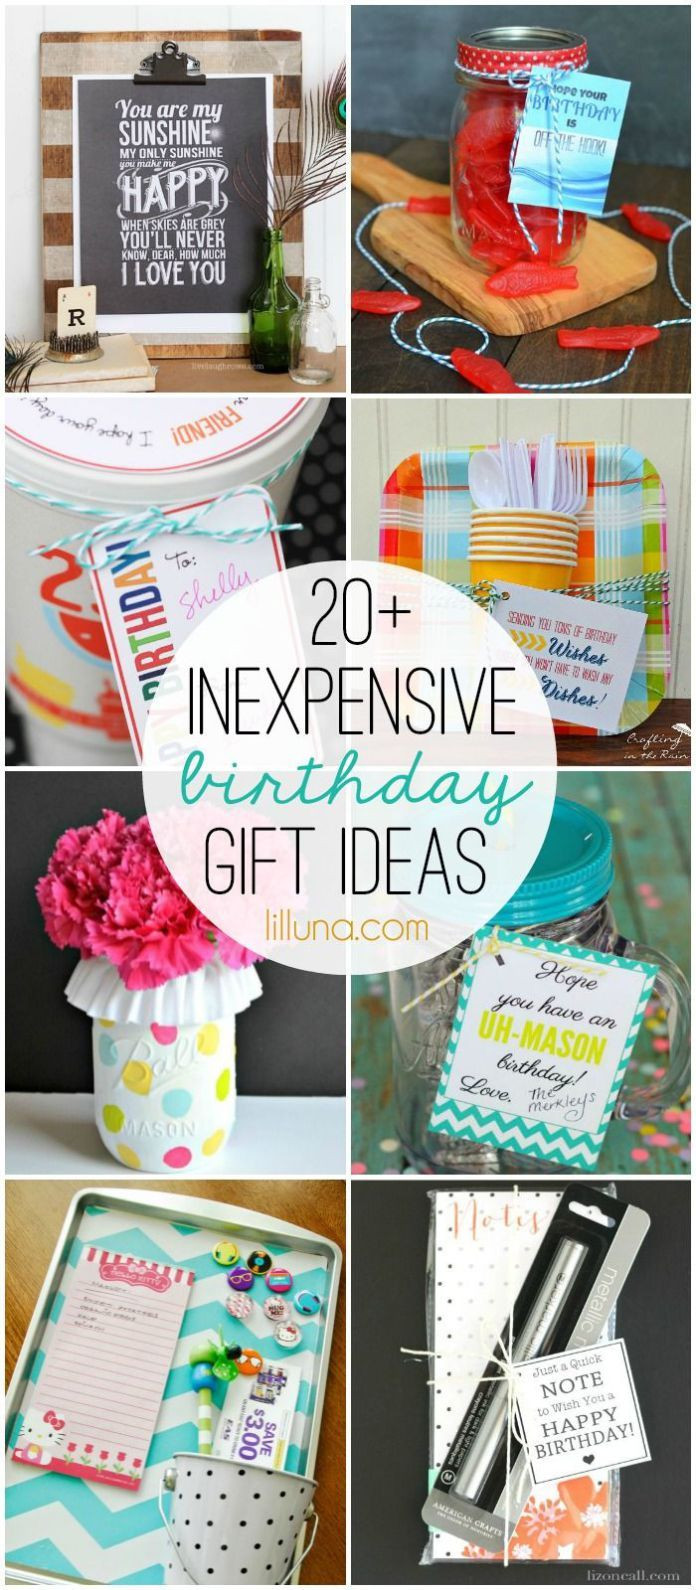 Cheap DIY Gifts
 Best 25 Inexpensive birthday ts ideas on Pinterest